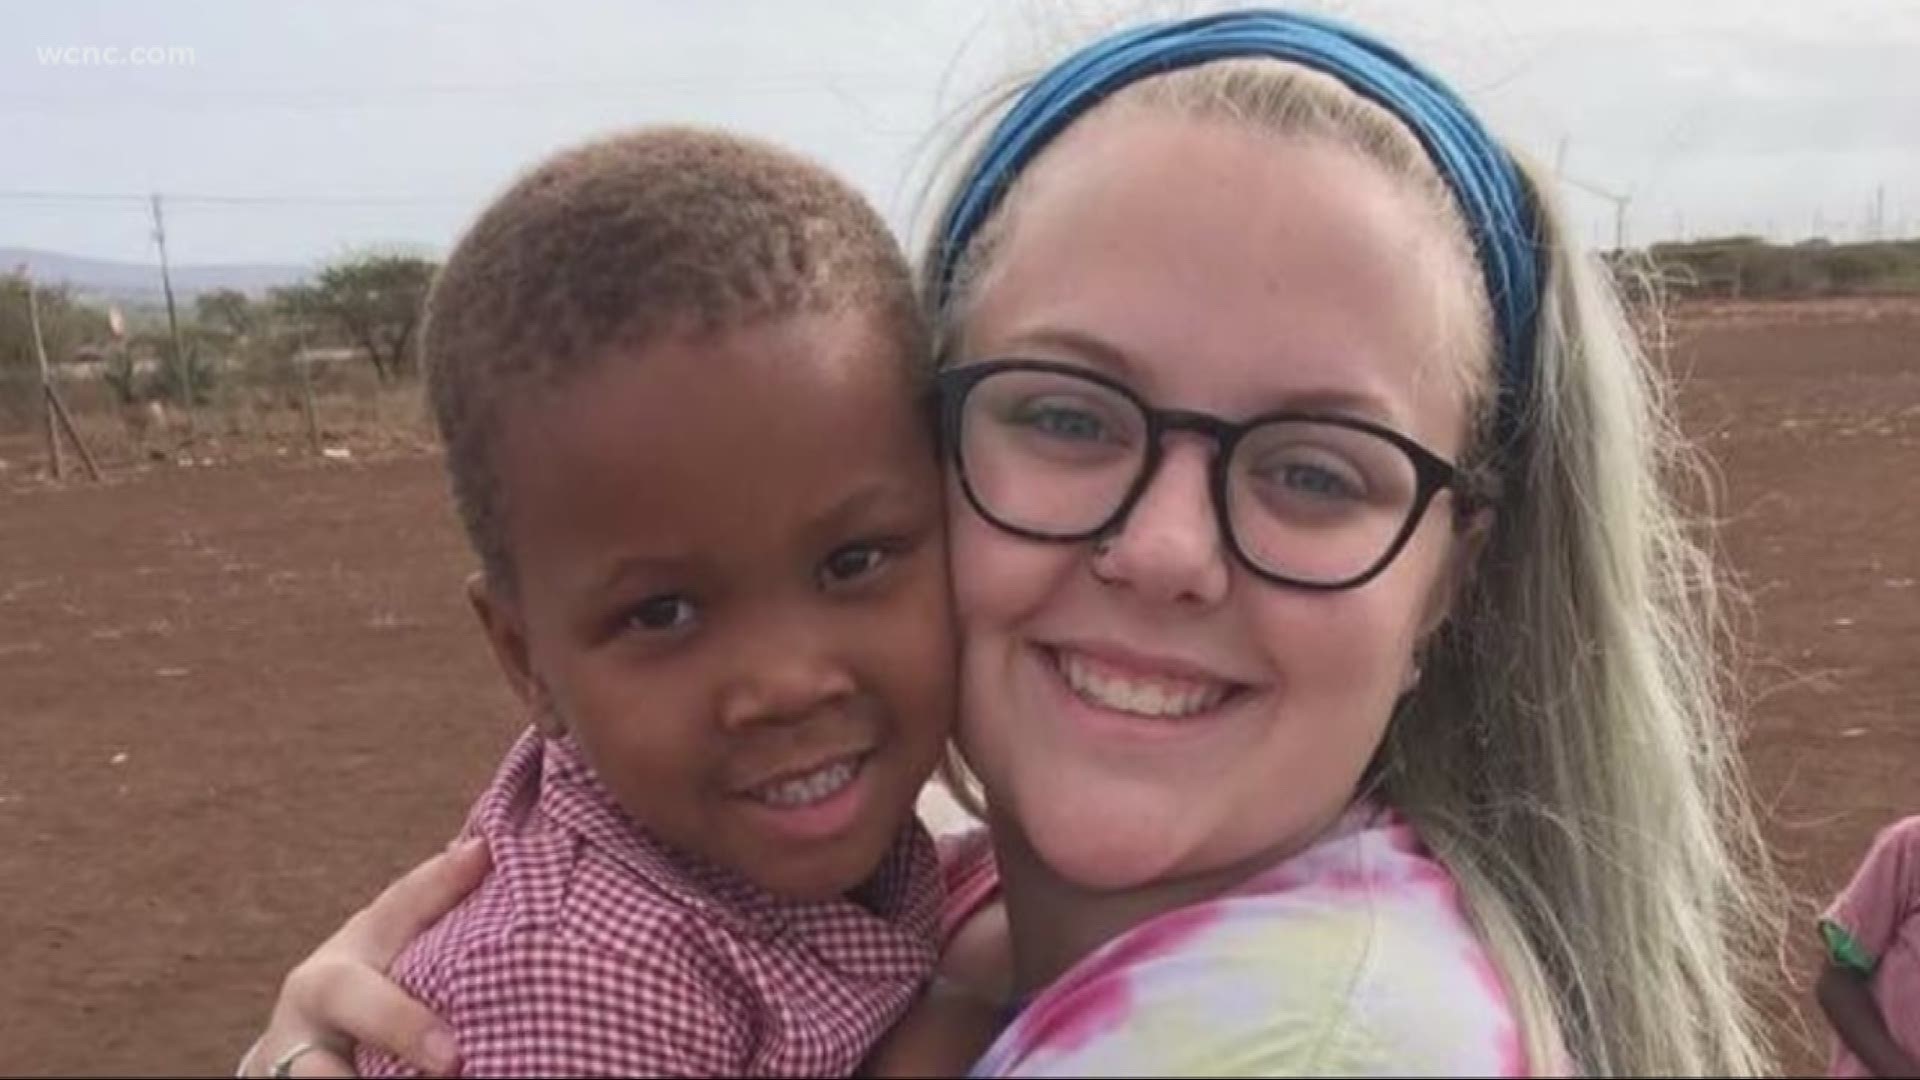 19-year-old Karson Whitesell was shot and killed at the peach stand in Fort Mill one year ago. Wednesday, her close friends and family gathered to celebrate and honor her life.